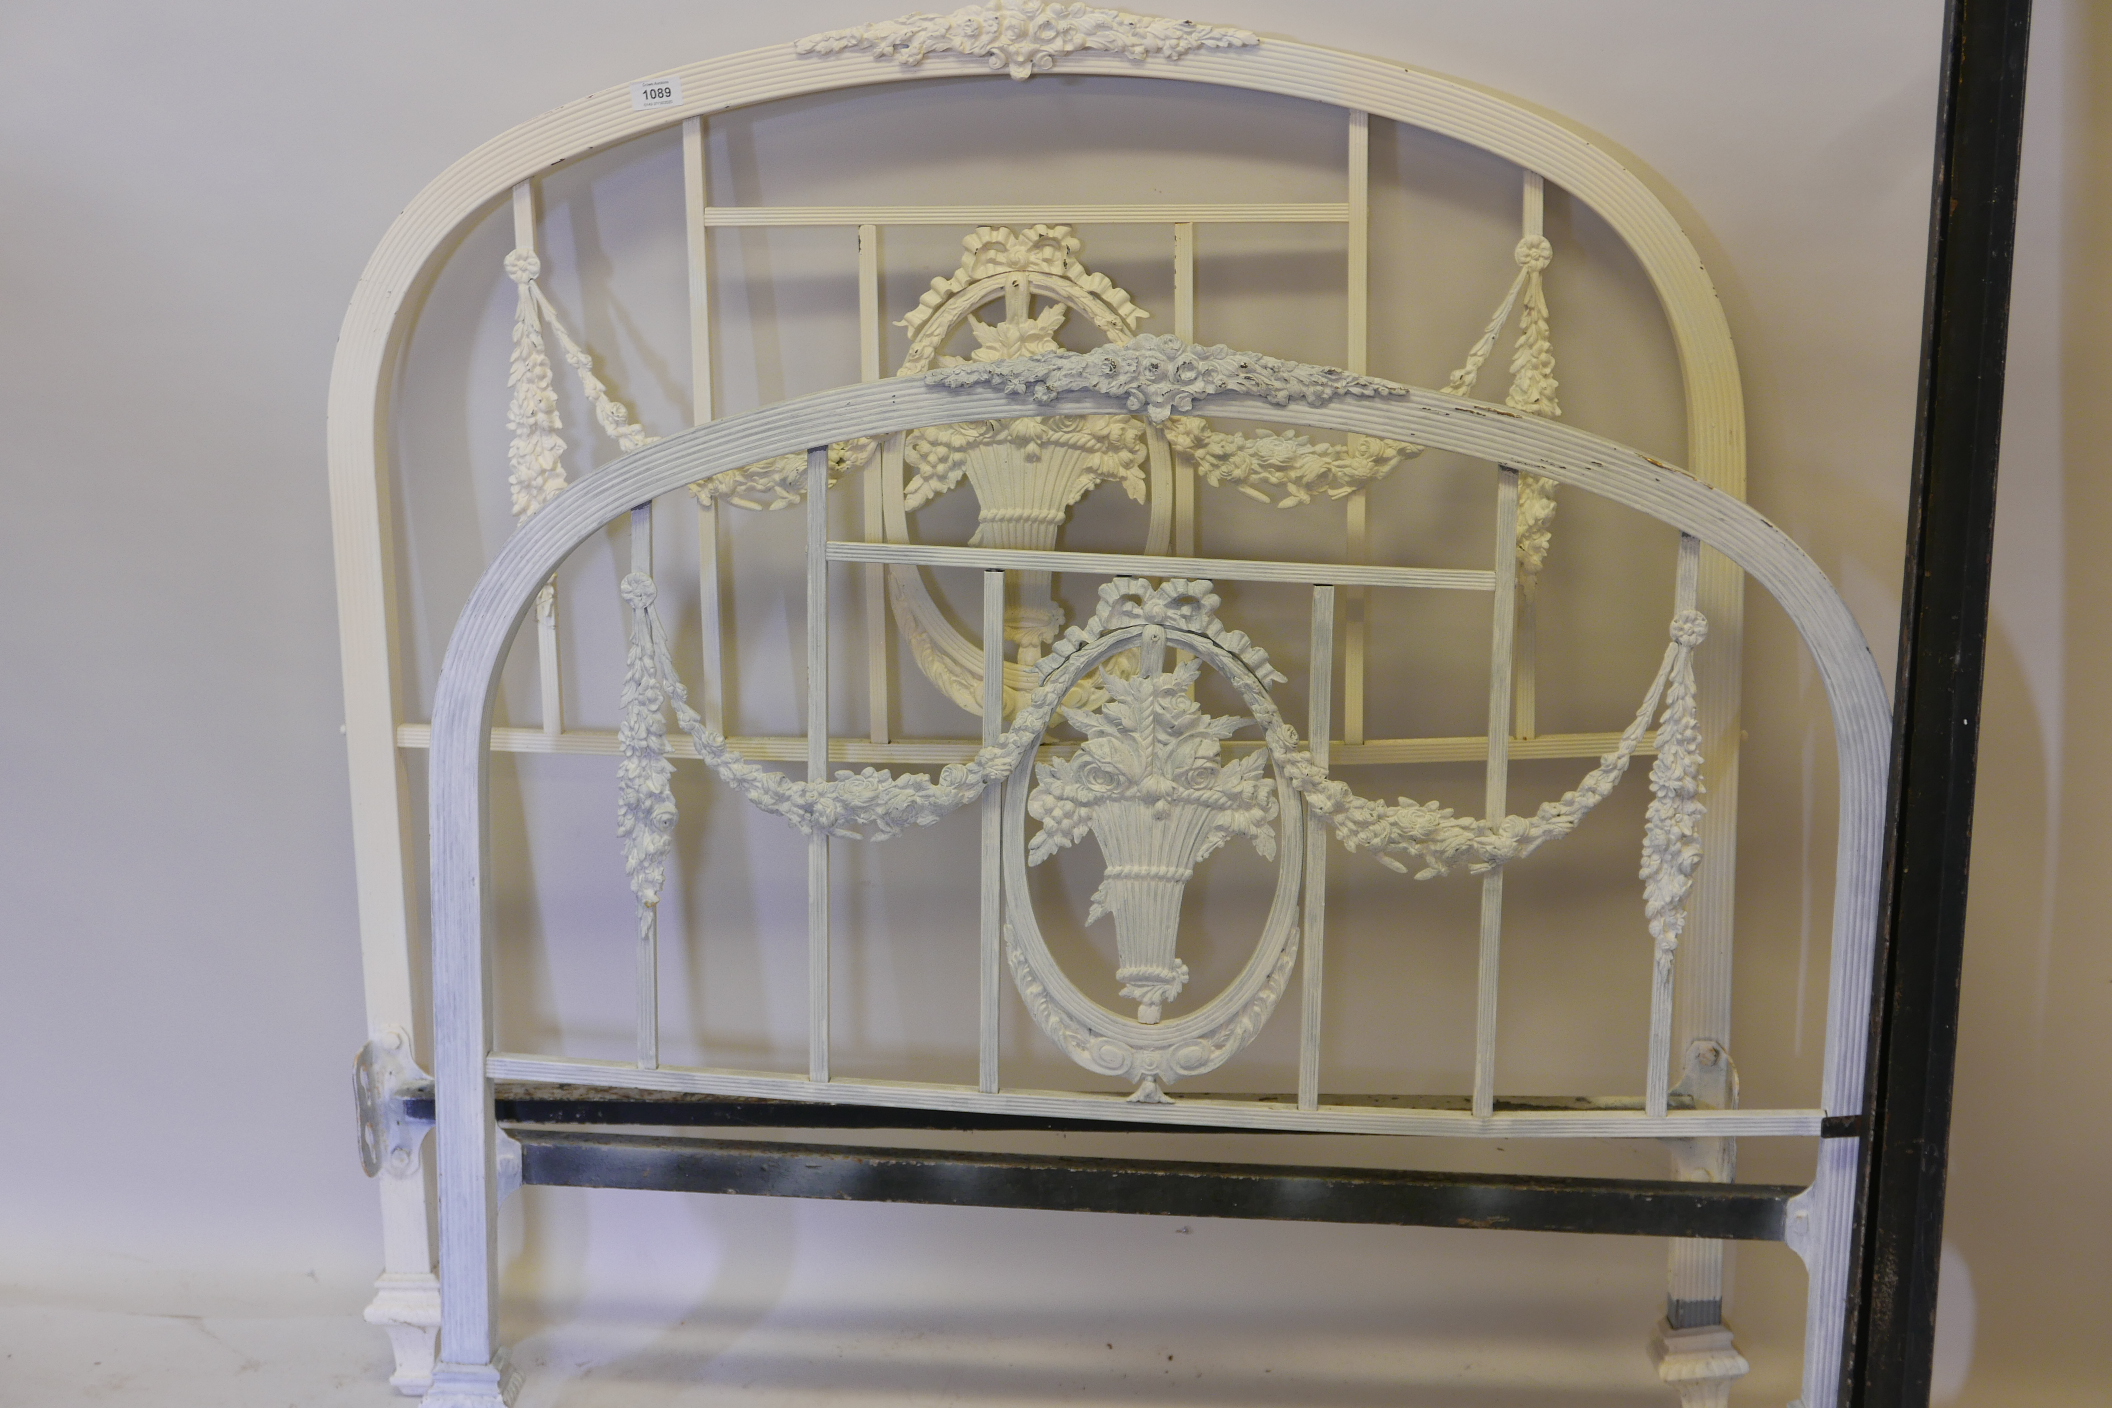 An early C20th French painted brass bed with swag and floral decoration, 42" wide x 44" x 74" - Image 2 of 2